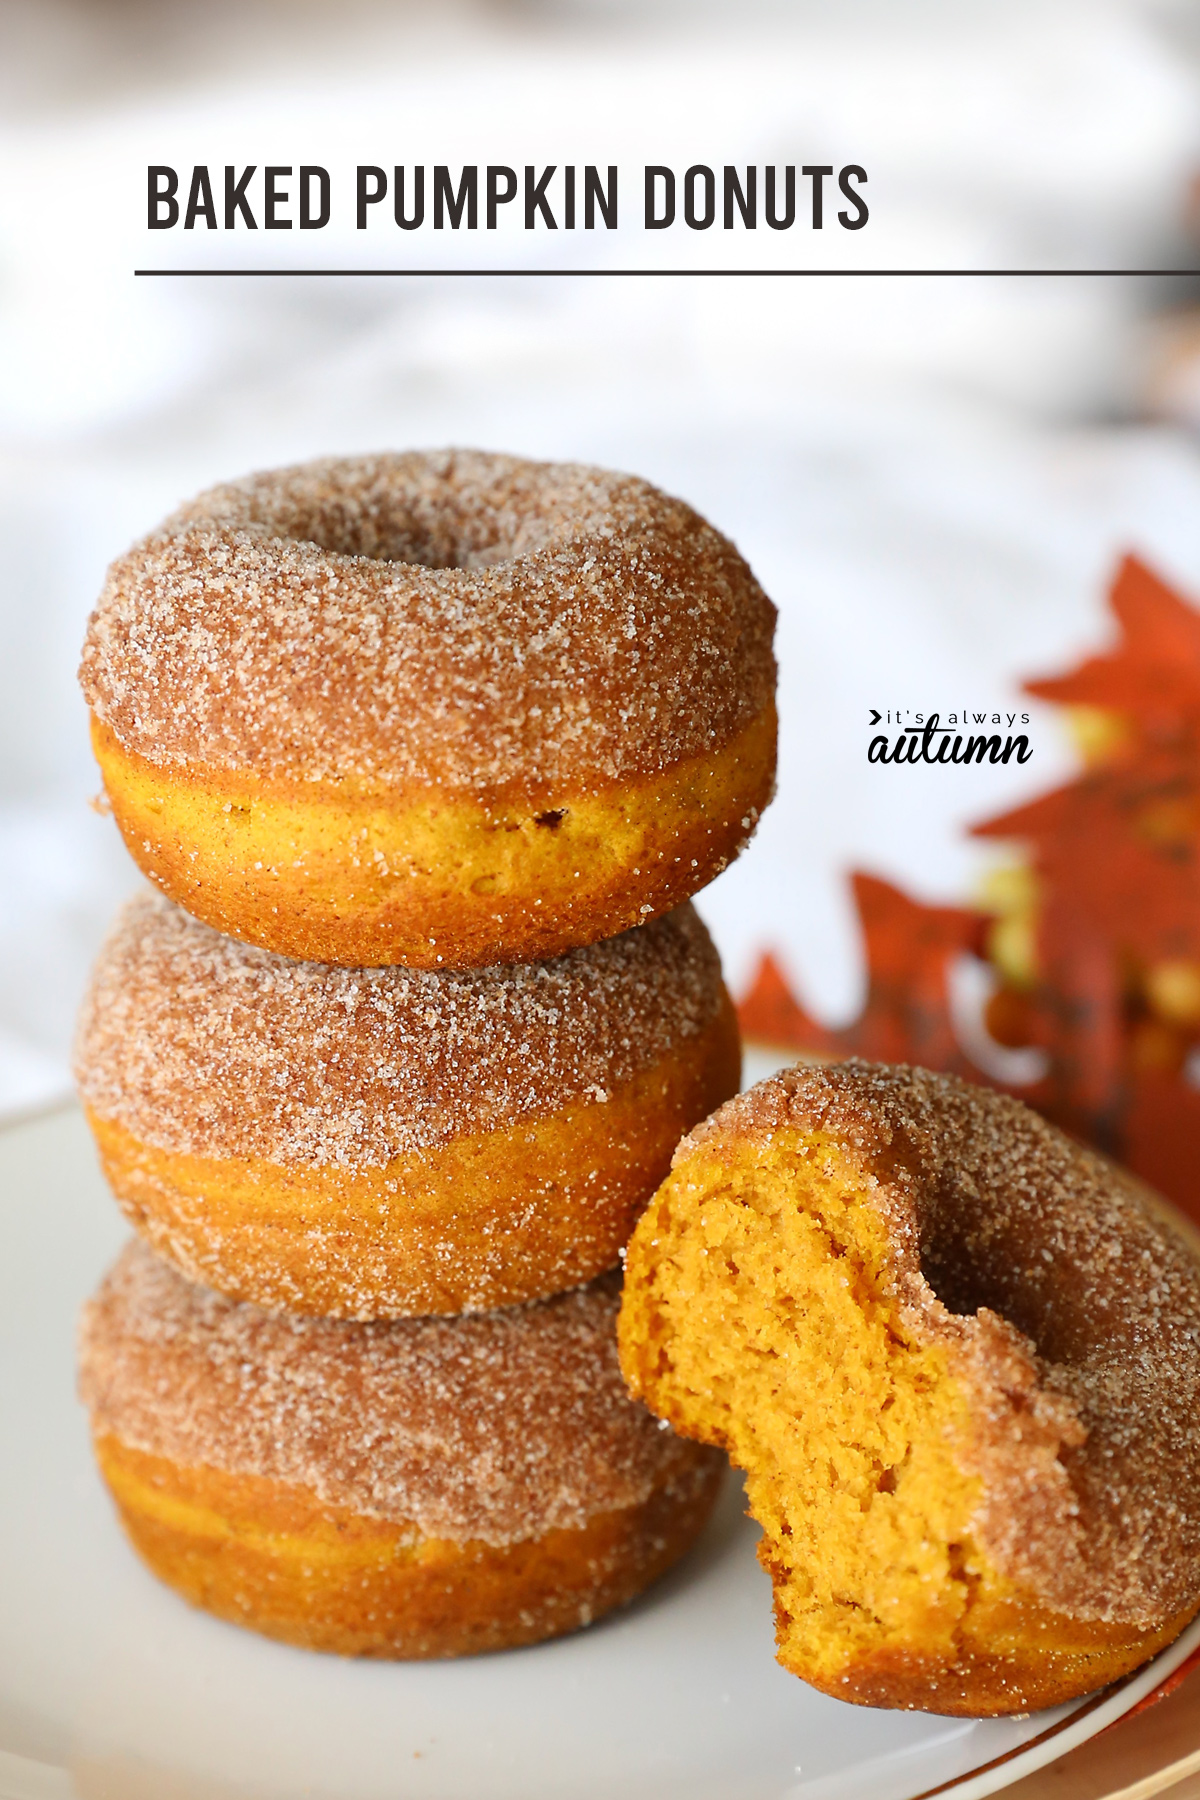 Baked pumpkin spice donuts are the perfect fall treat!